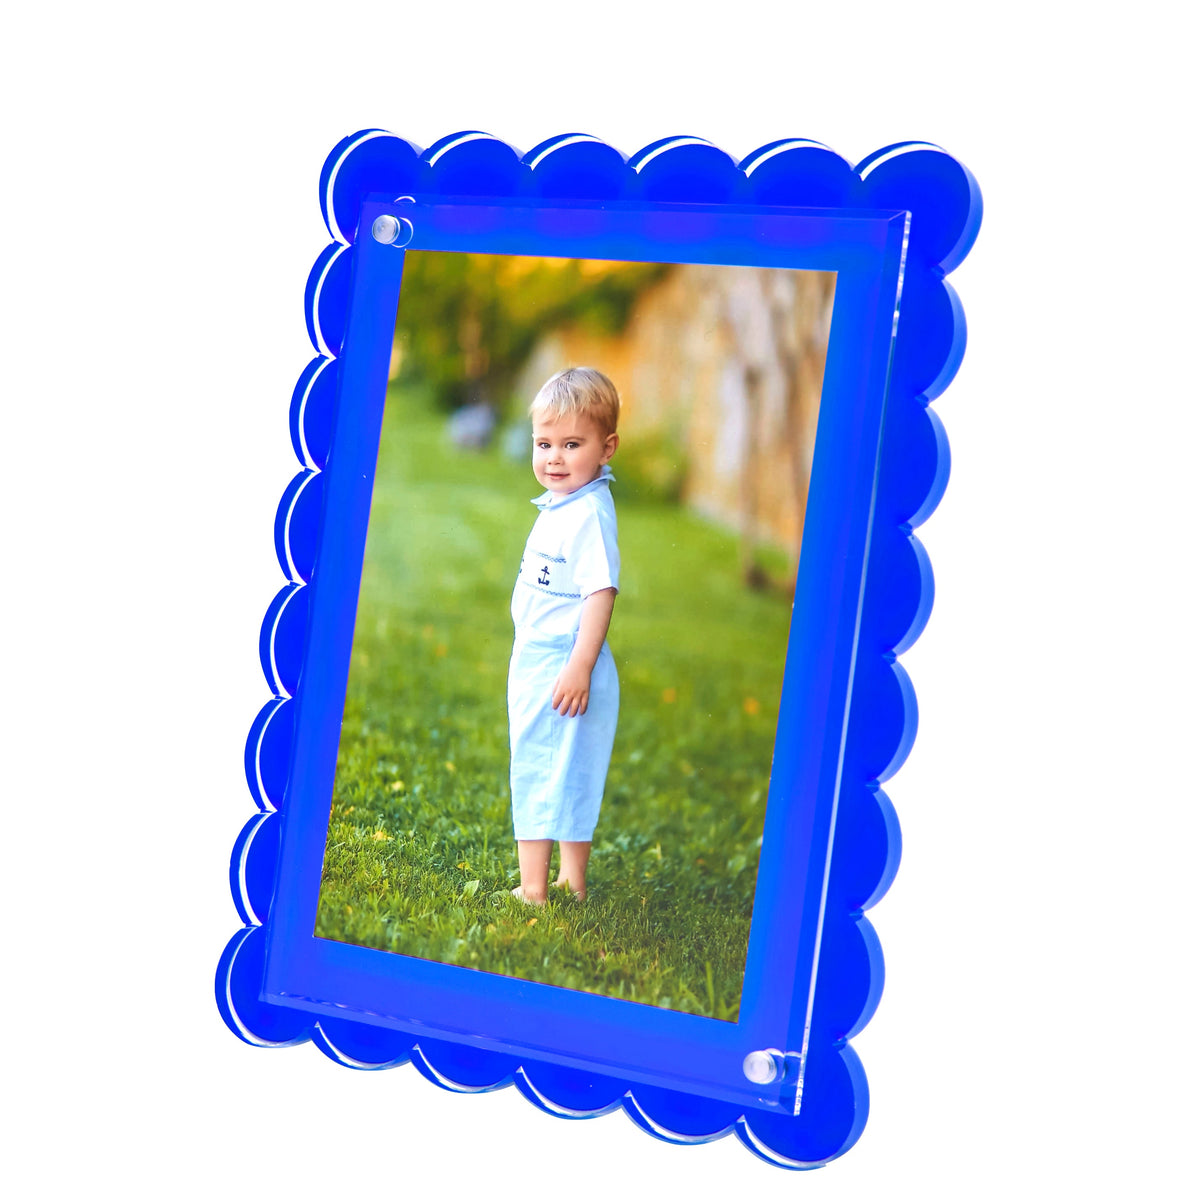 Frame SCALLOP Blue 4 inches by 6 inches or 5 inches by 7 inches